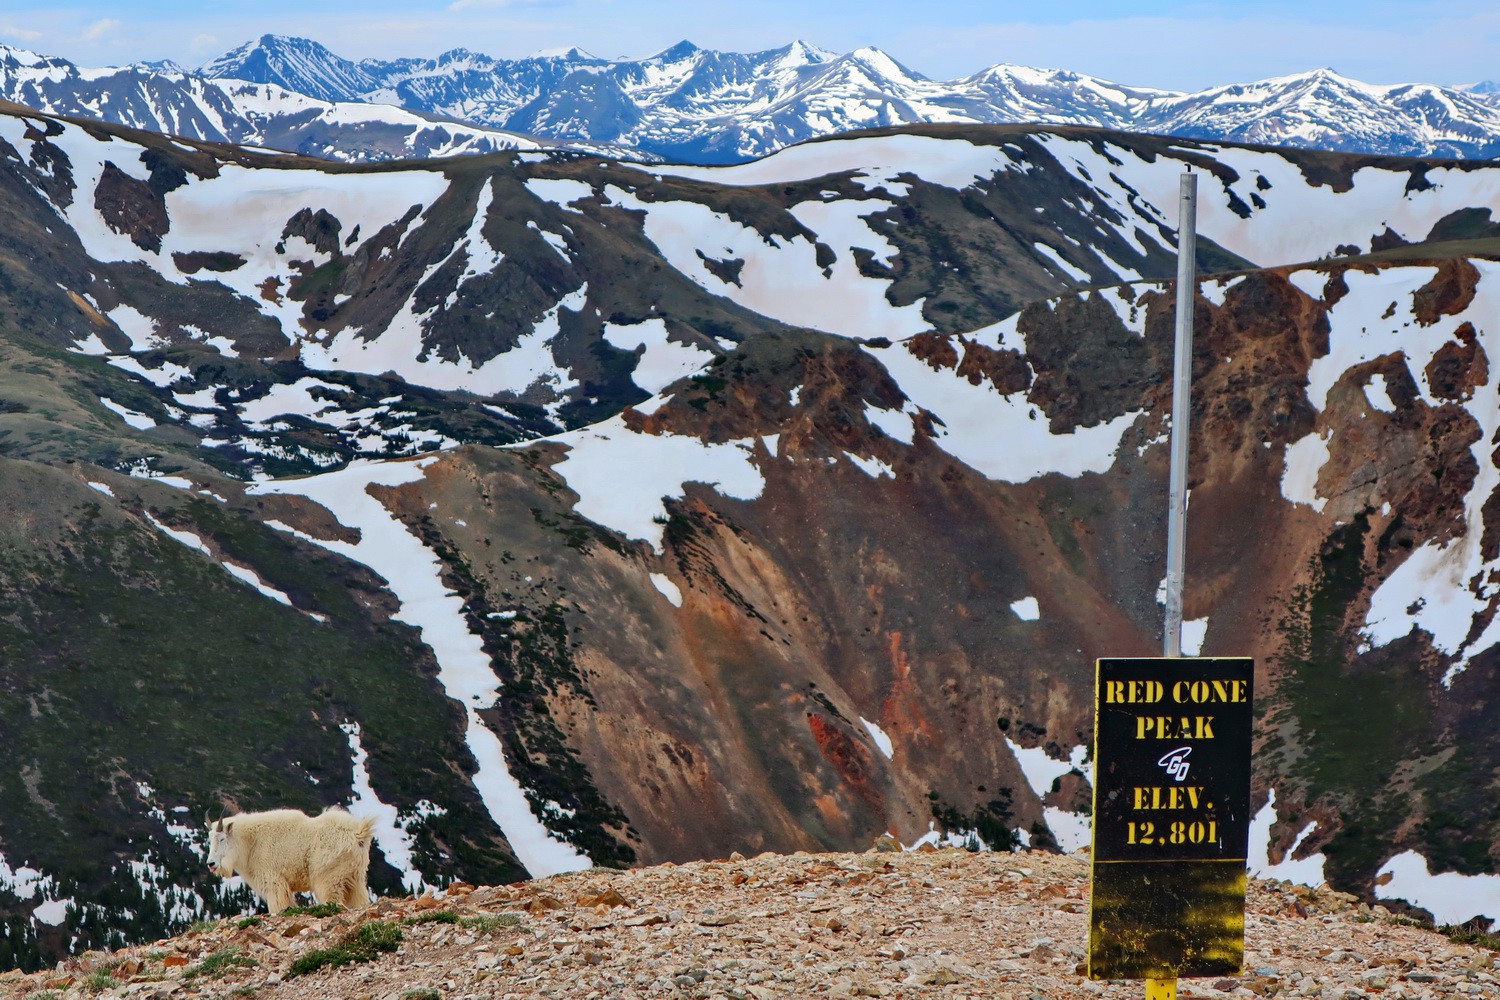 Summit of 3897 meters high Red Cone Peak with Montain Goat on the left